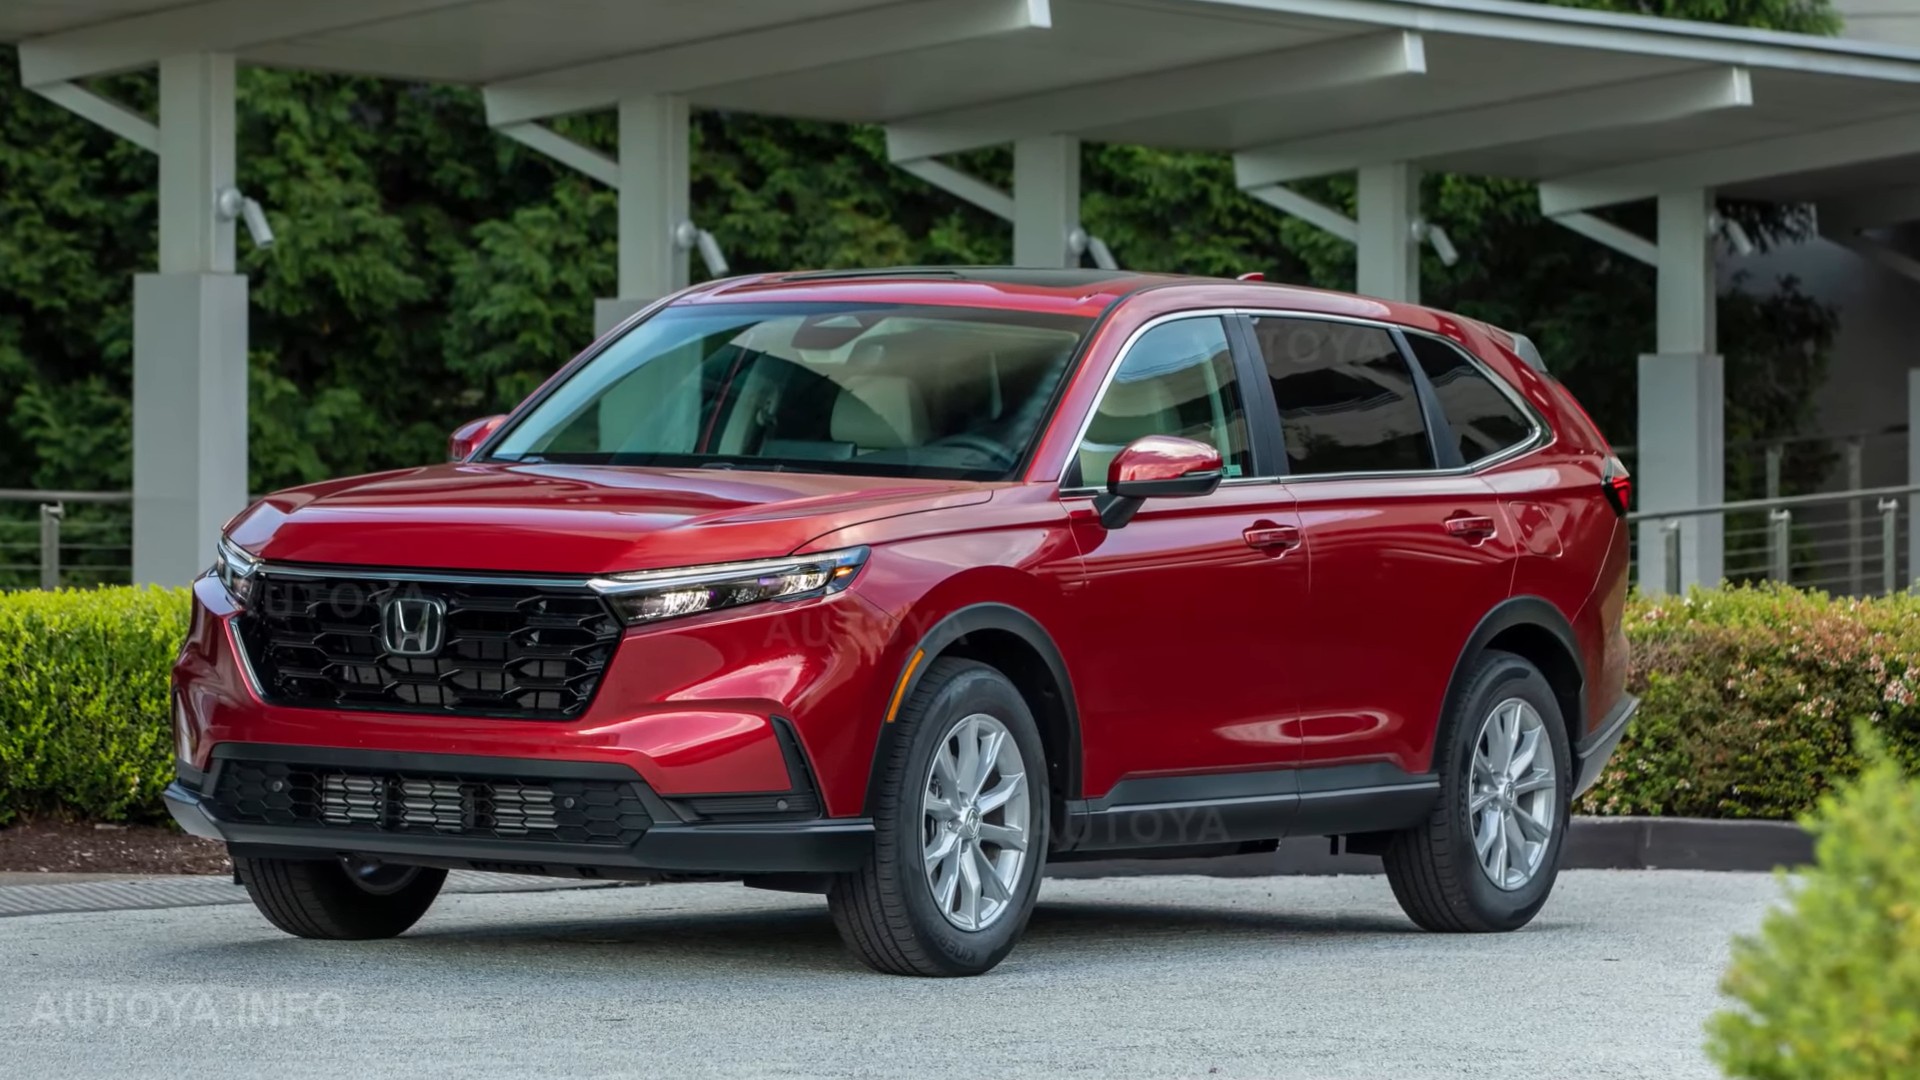 2025 Honda Grand CRV Virtually Joins the Roster With Three Rows and